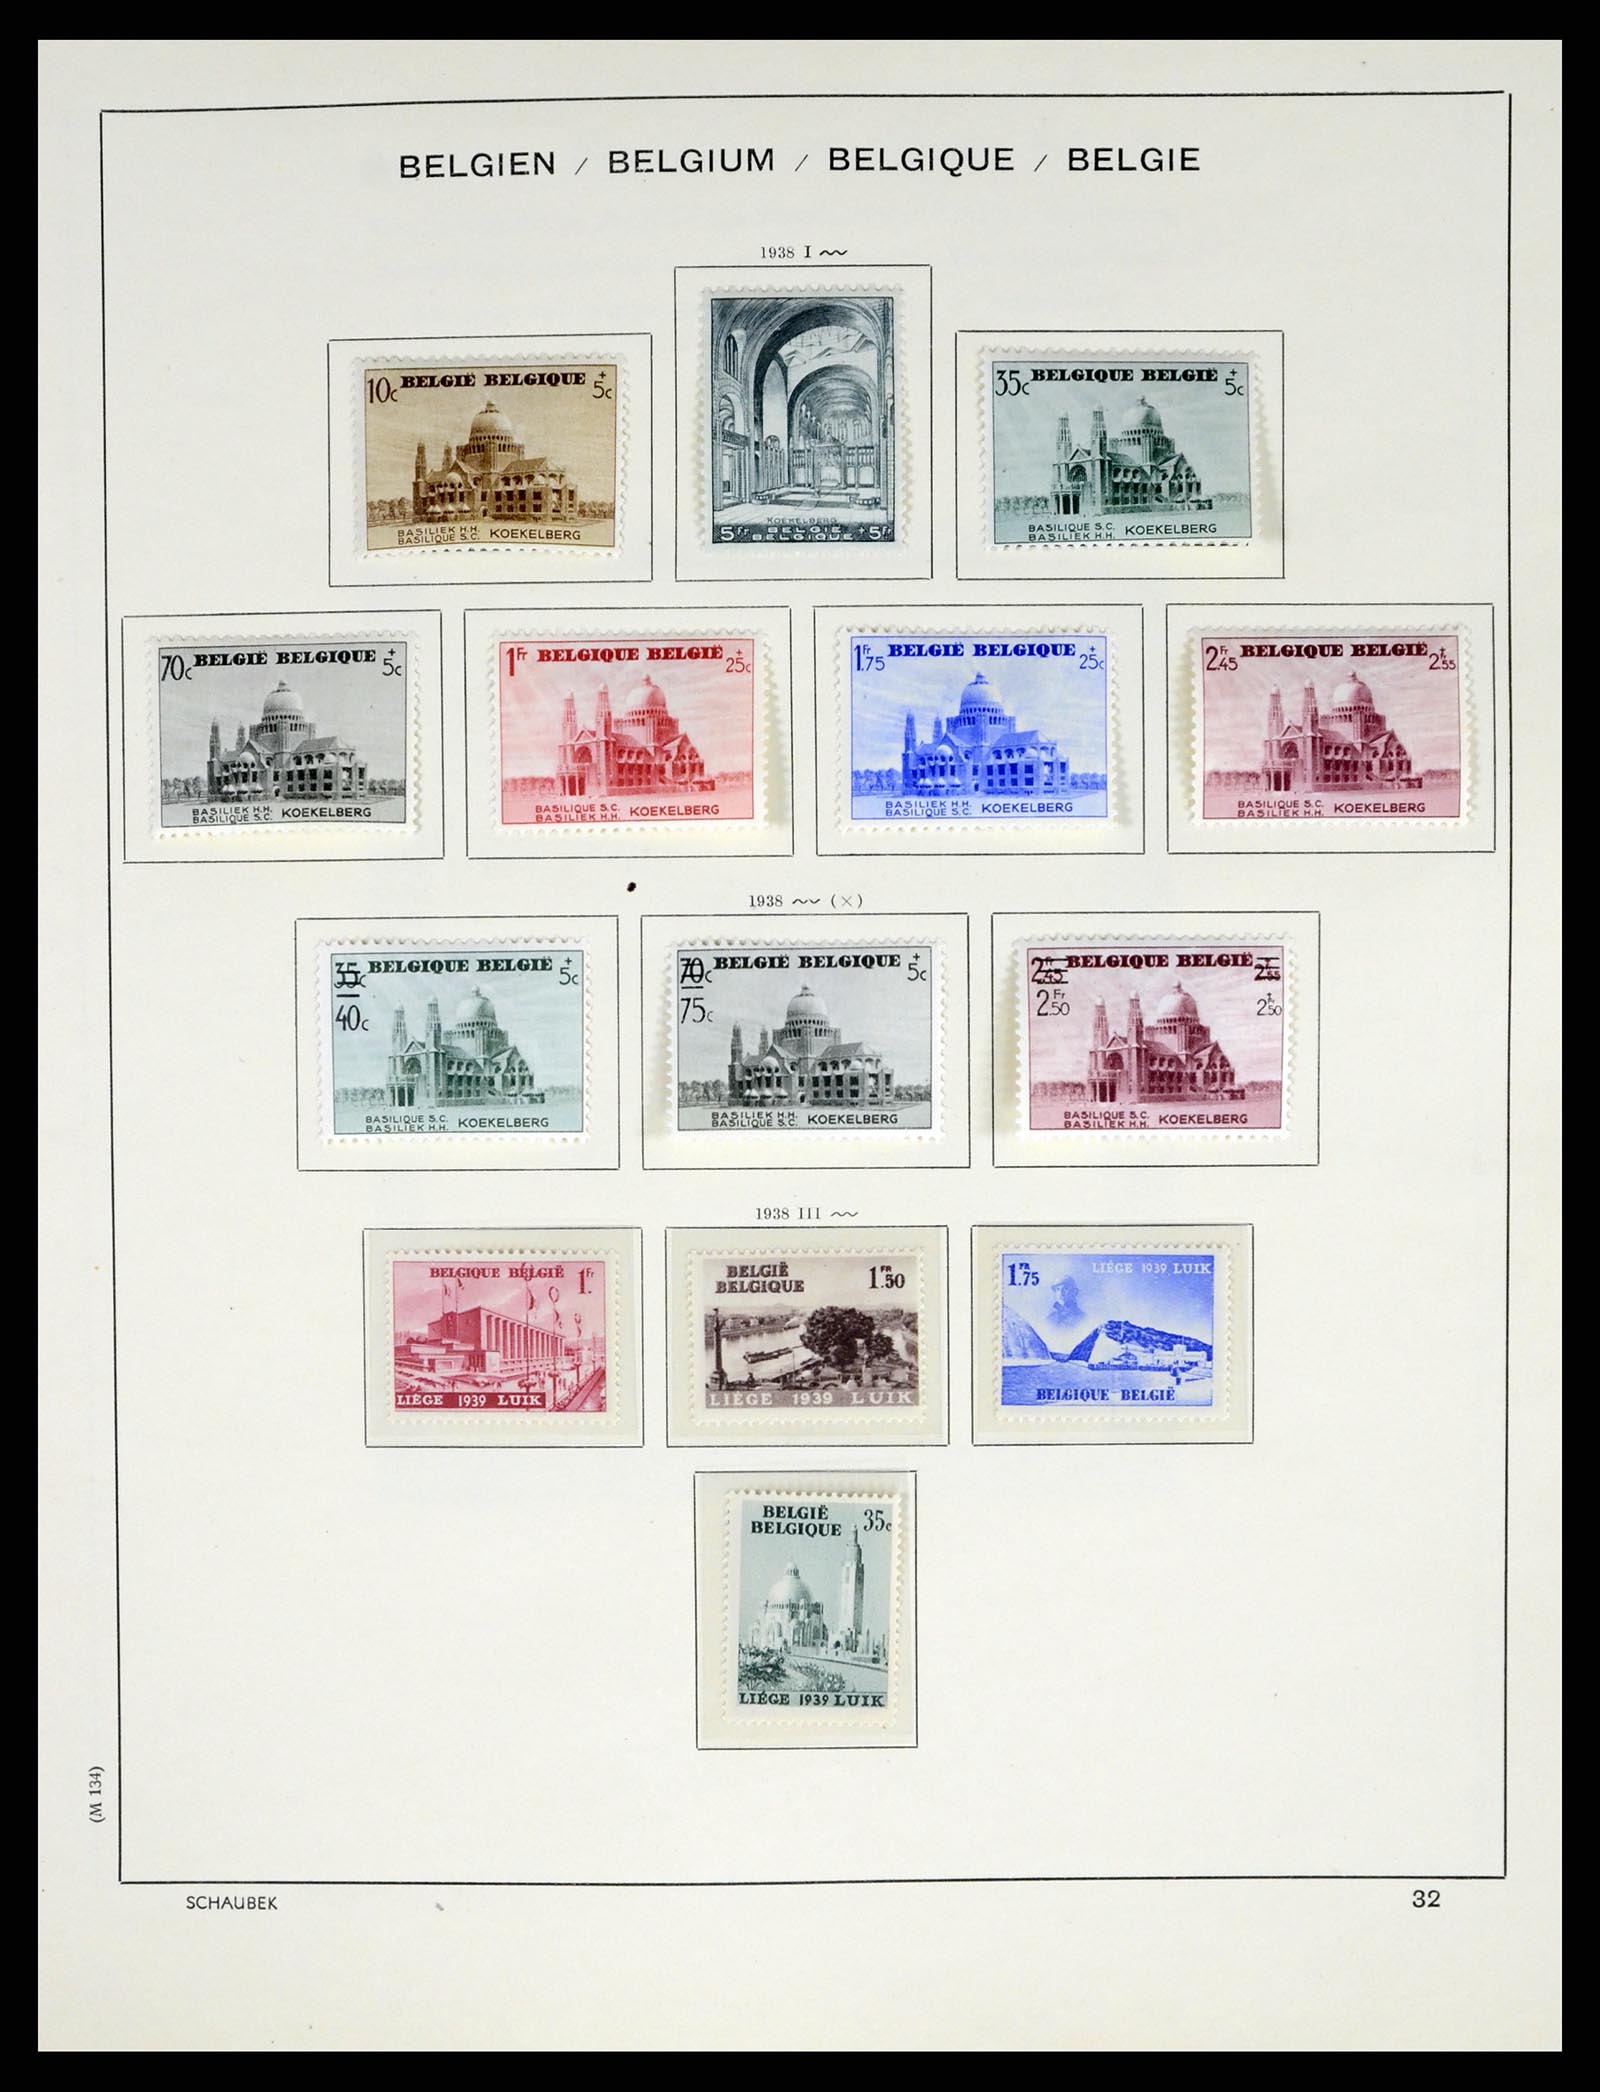 37595 034 - Stamp collection 37595 Super collection Belgium 1849-2015!